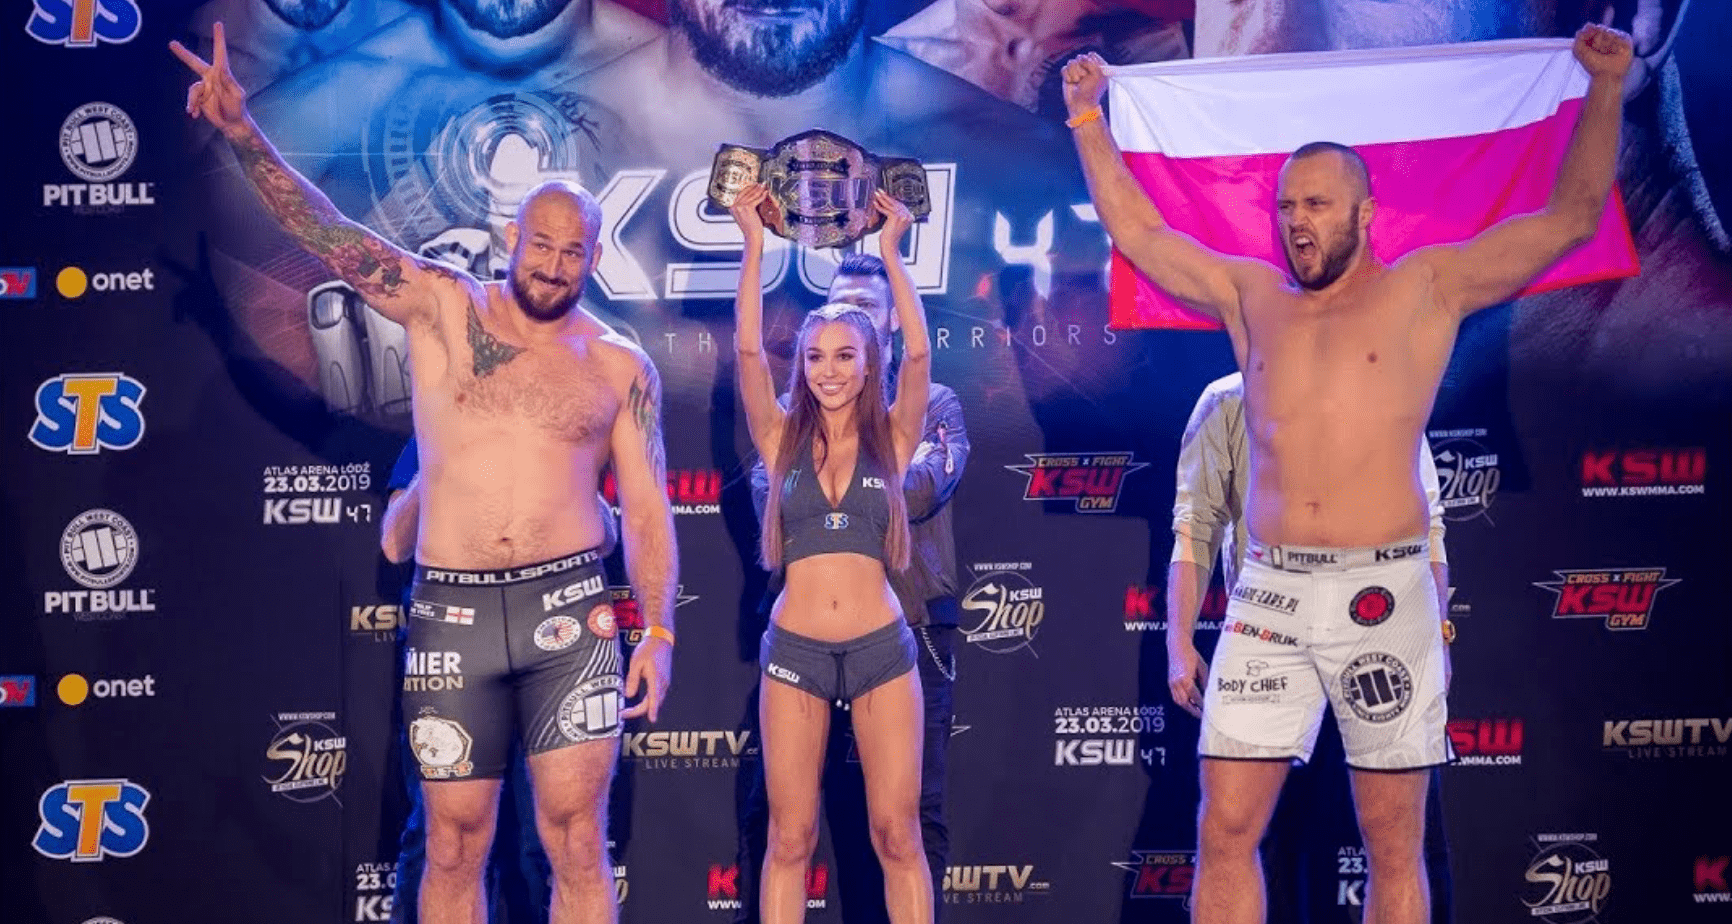 KSW 47: The X-Warriors Results